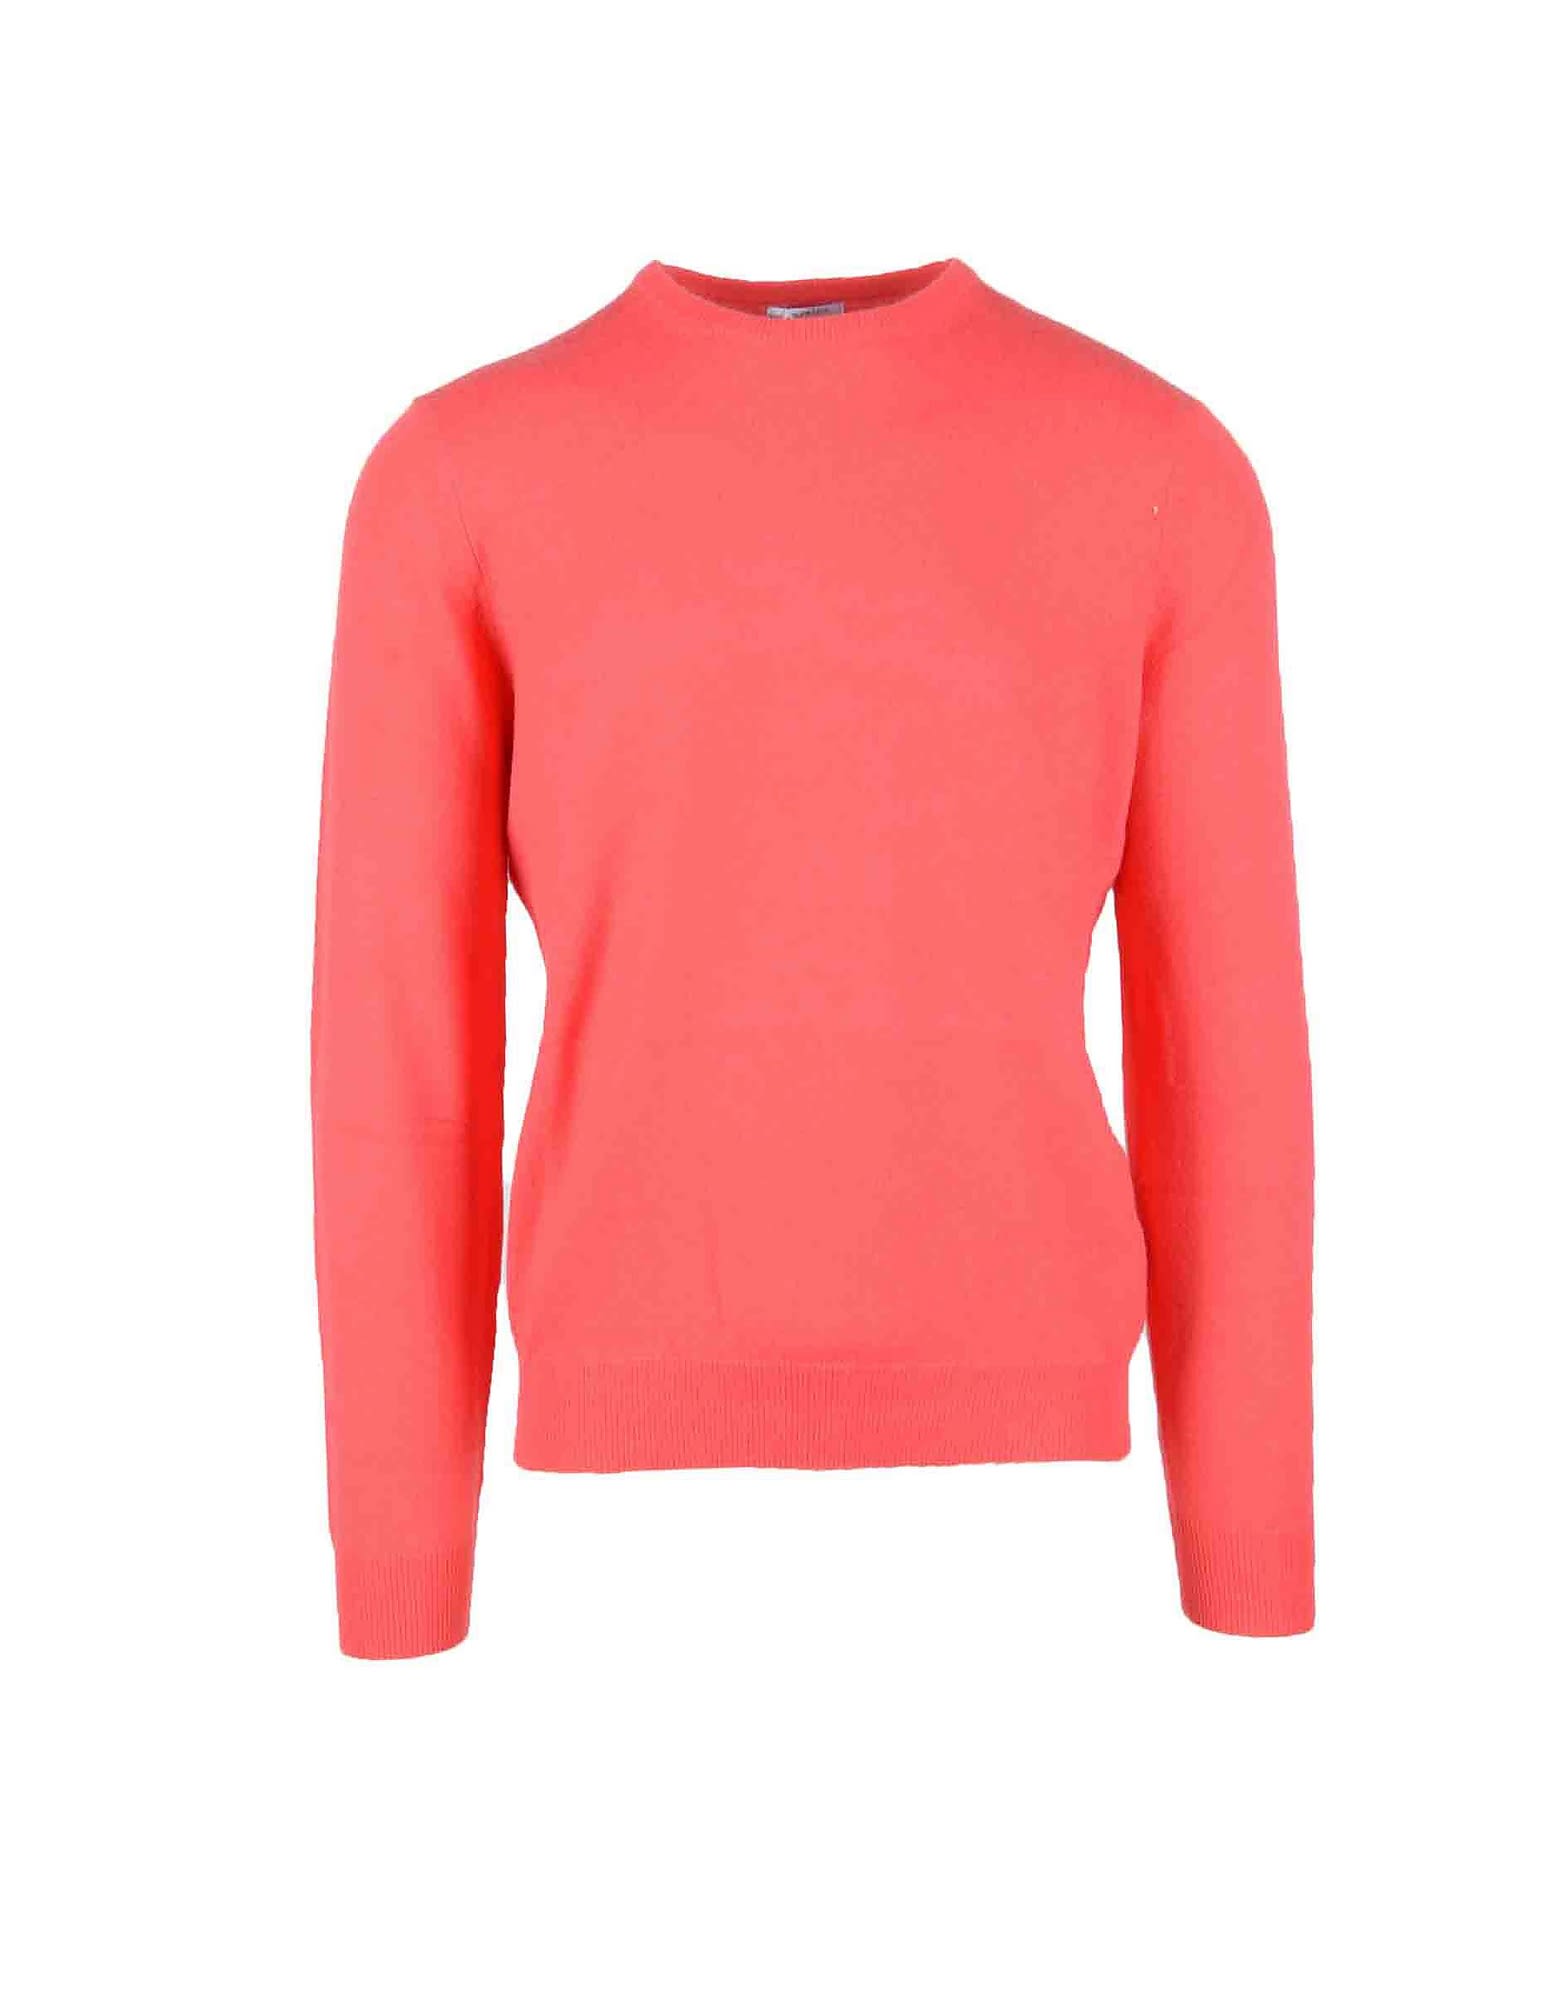 Mens Coral Sweater